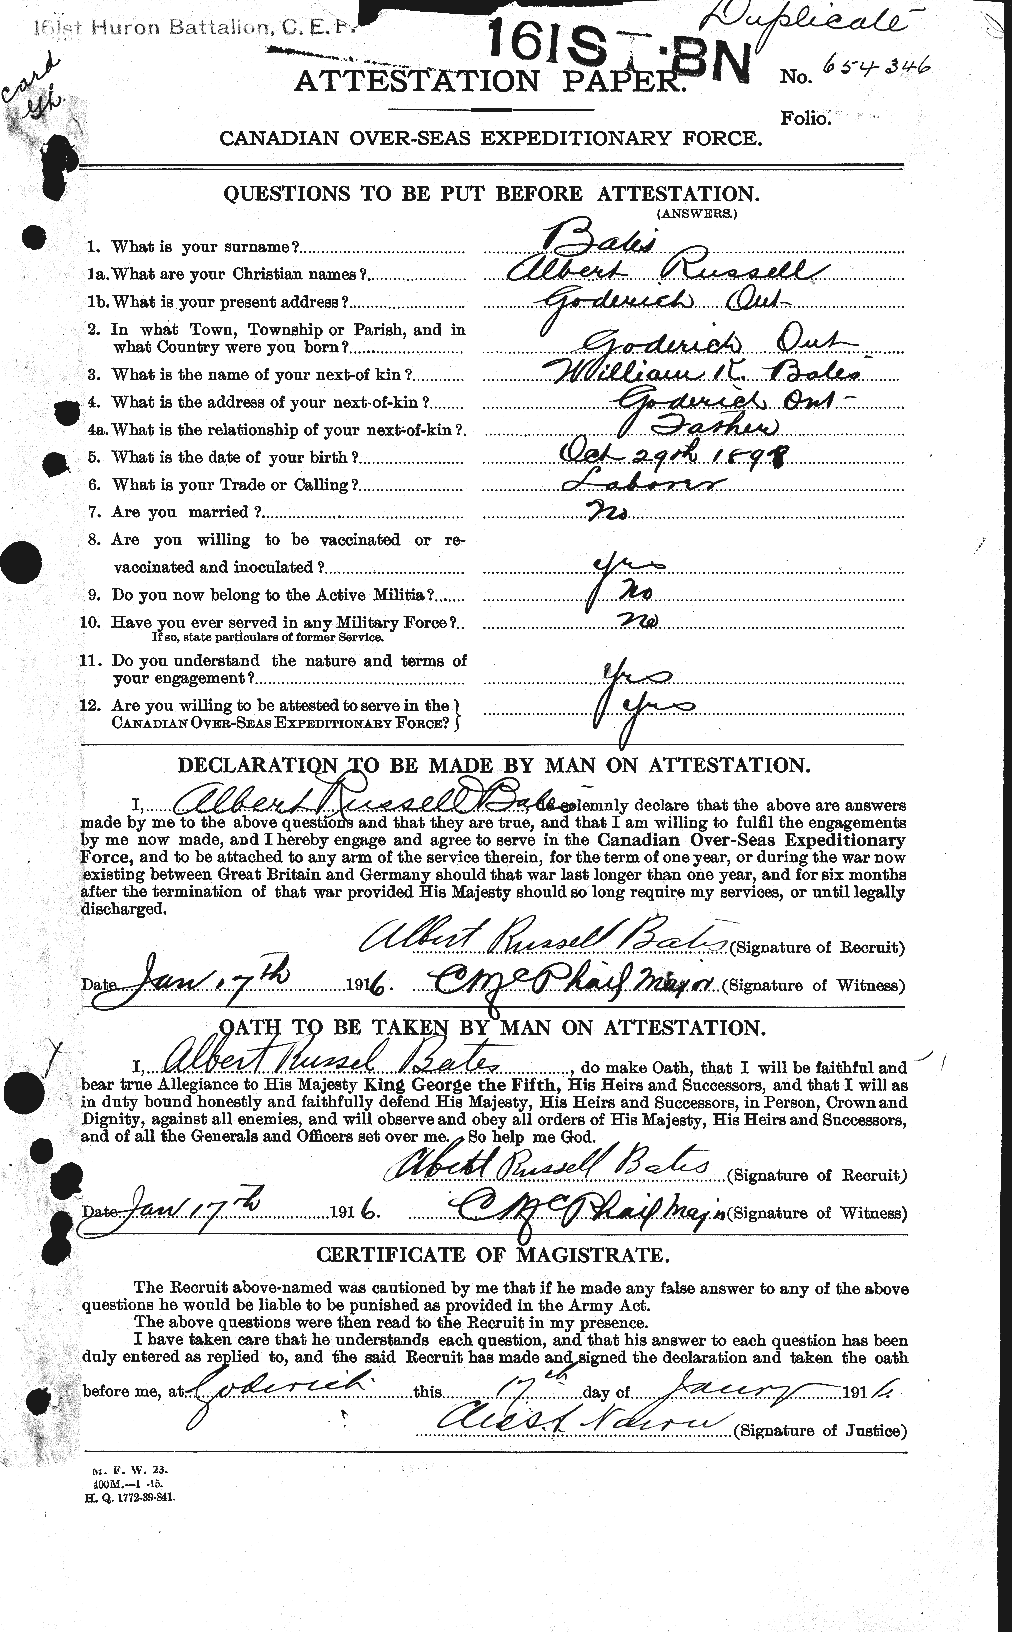 Personnel Records of the First World War - CEF 227938a